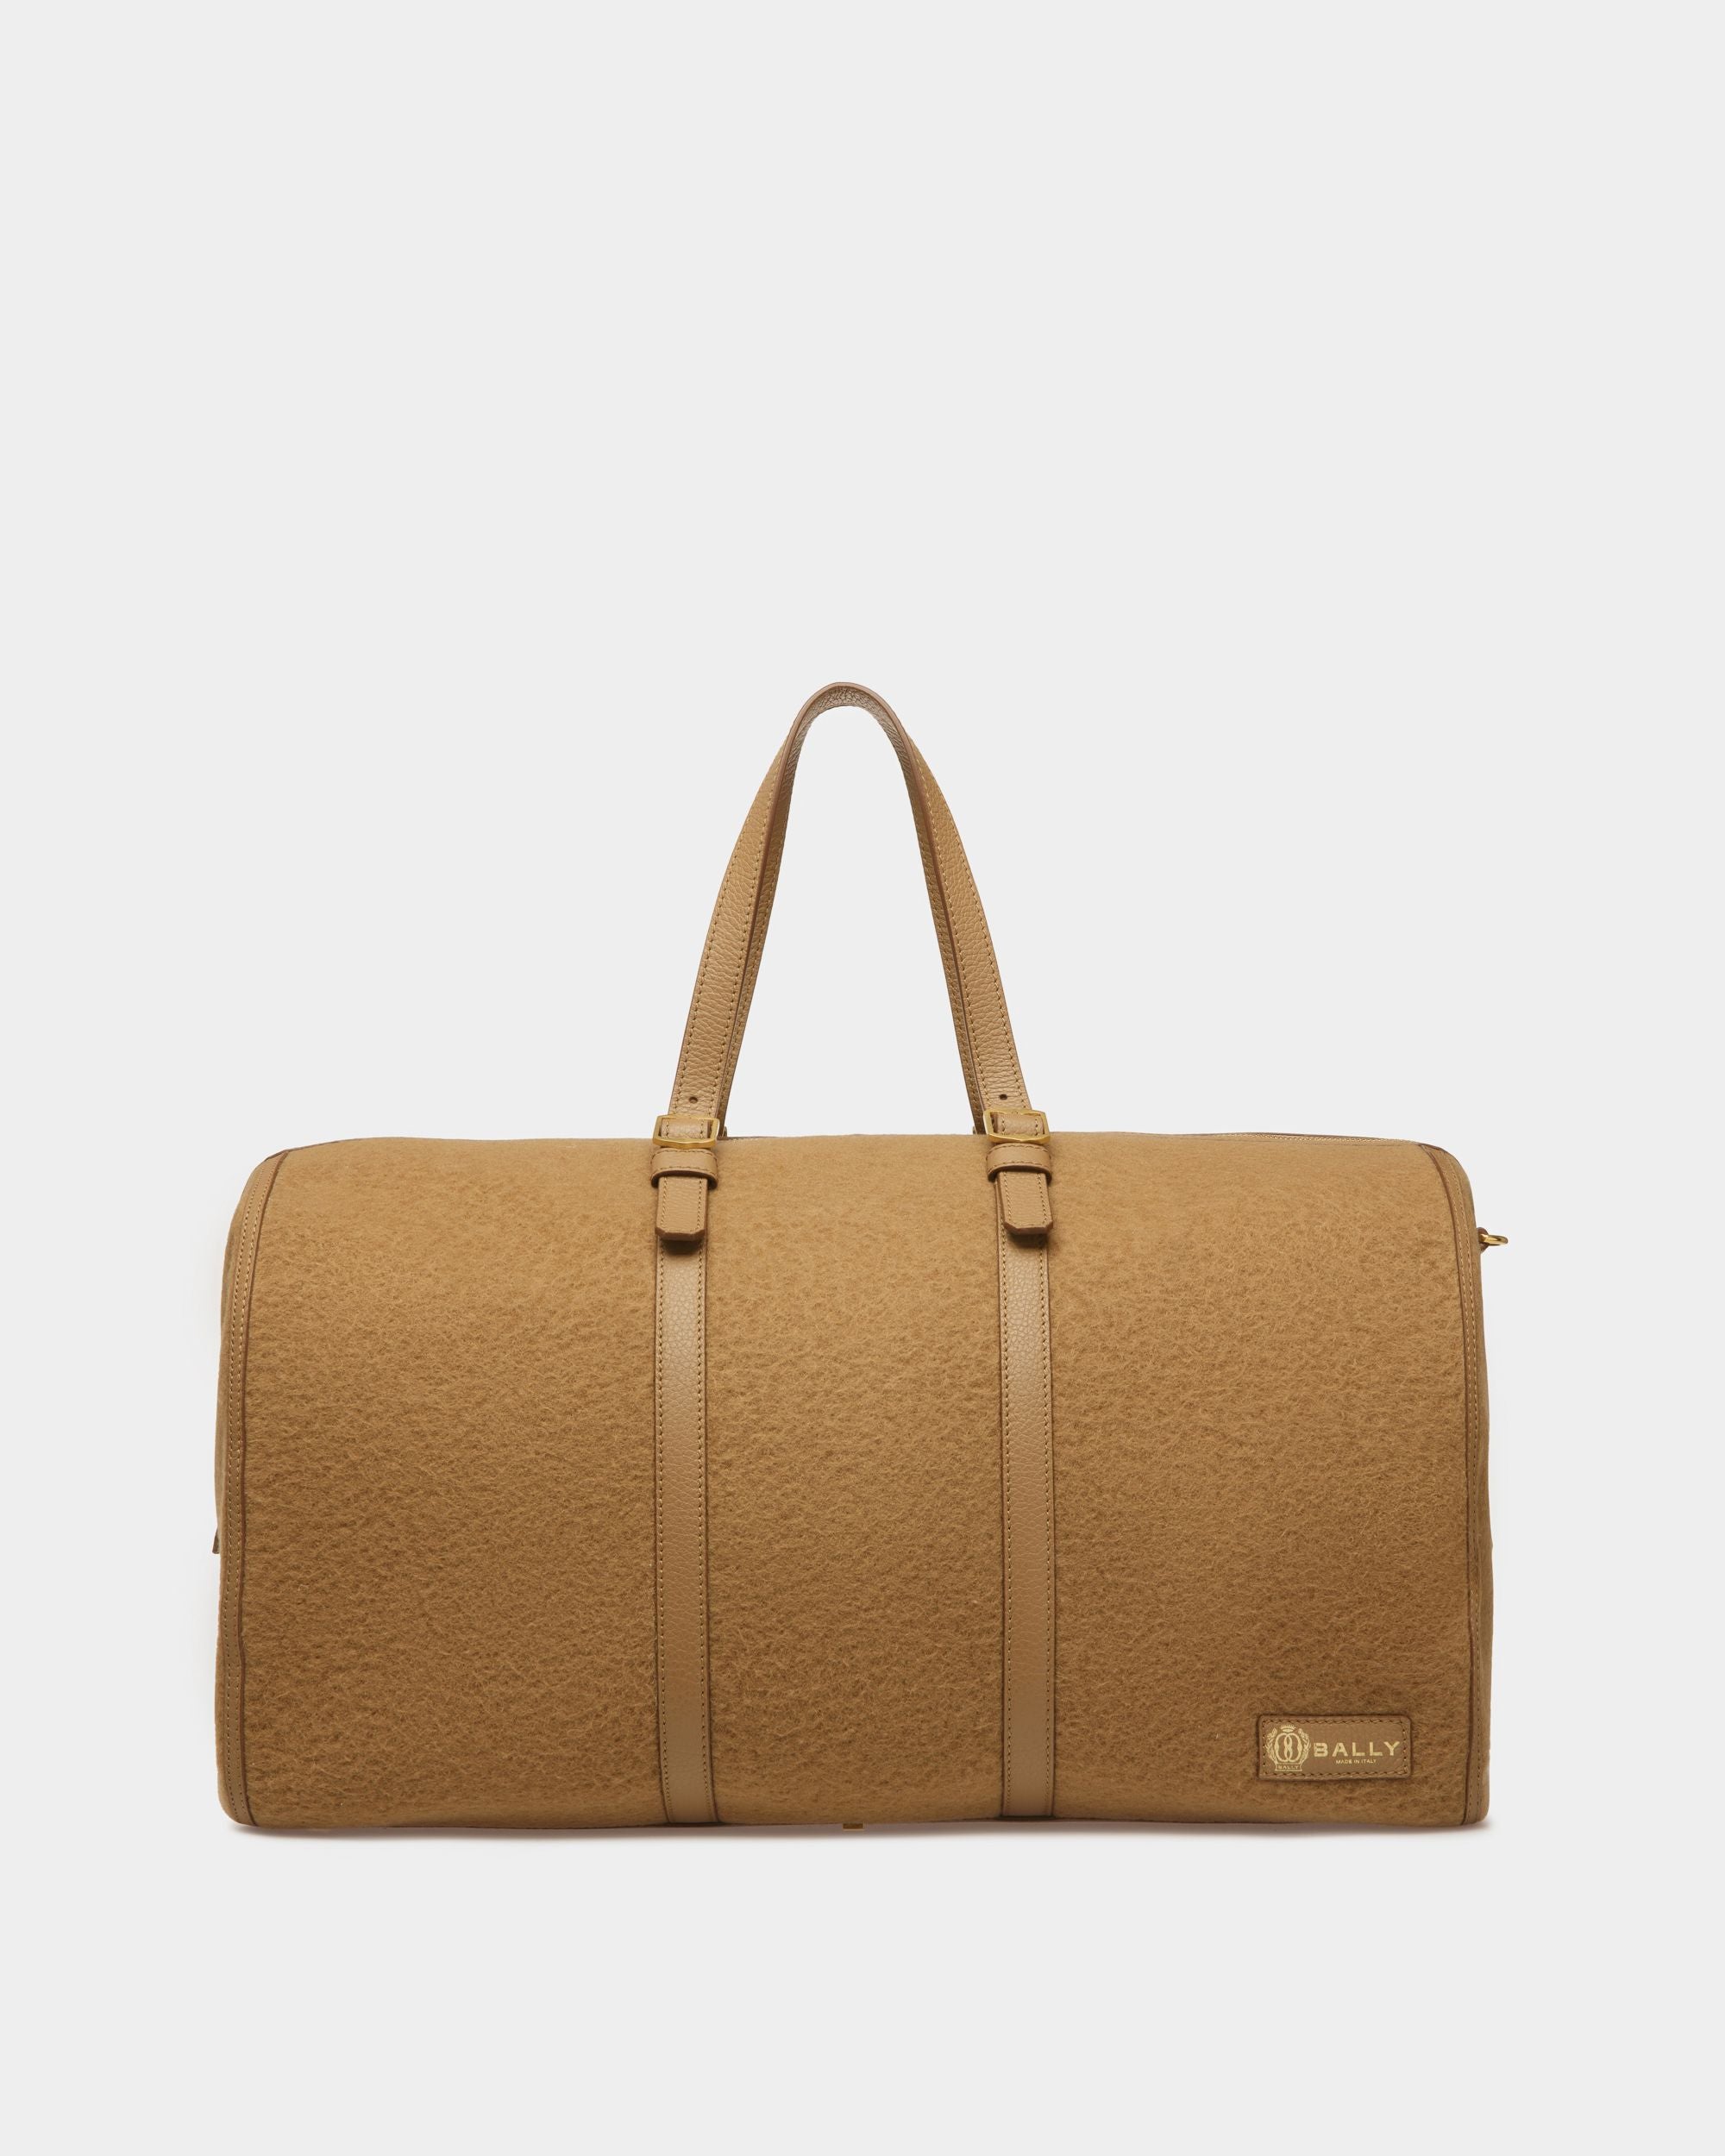 Week Out | Men's Travel Bag | Camel Fabric And Leather | Bally | Still Life Front